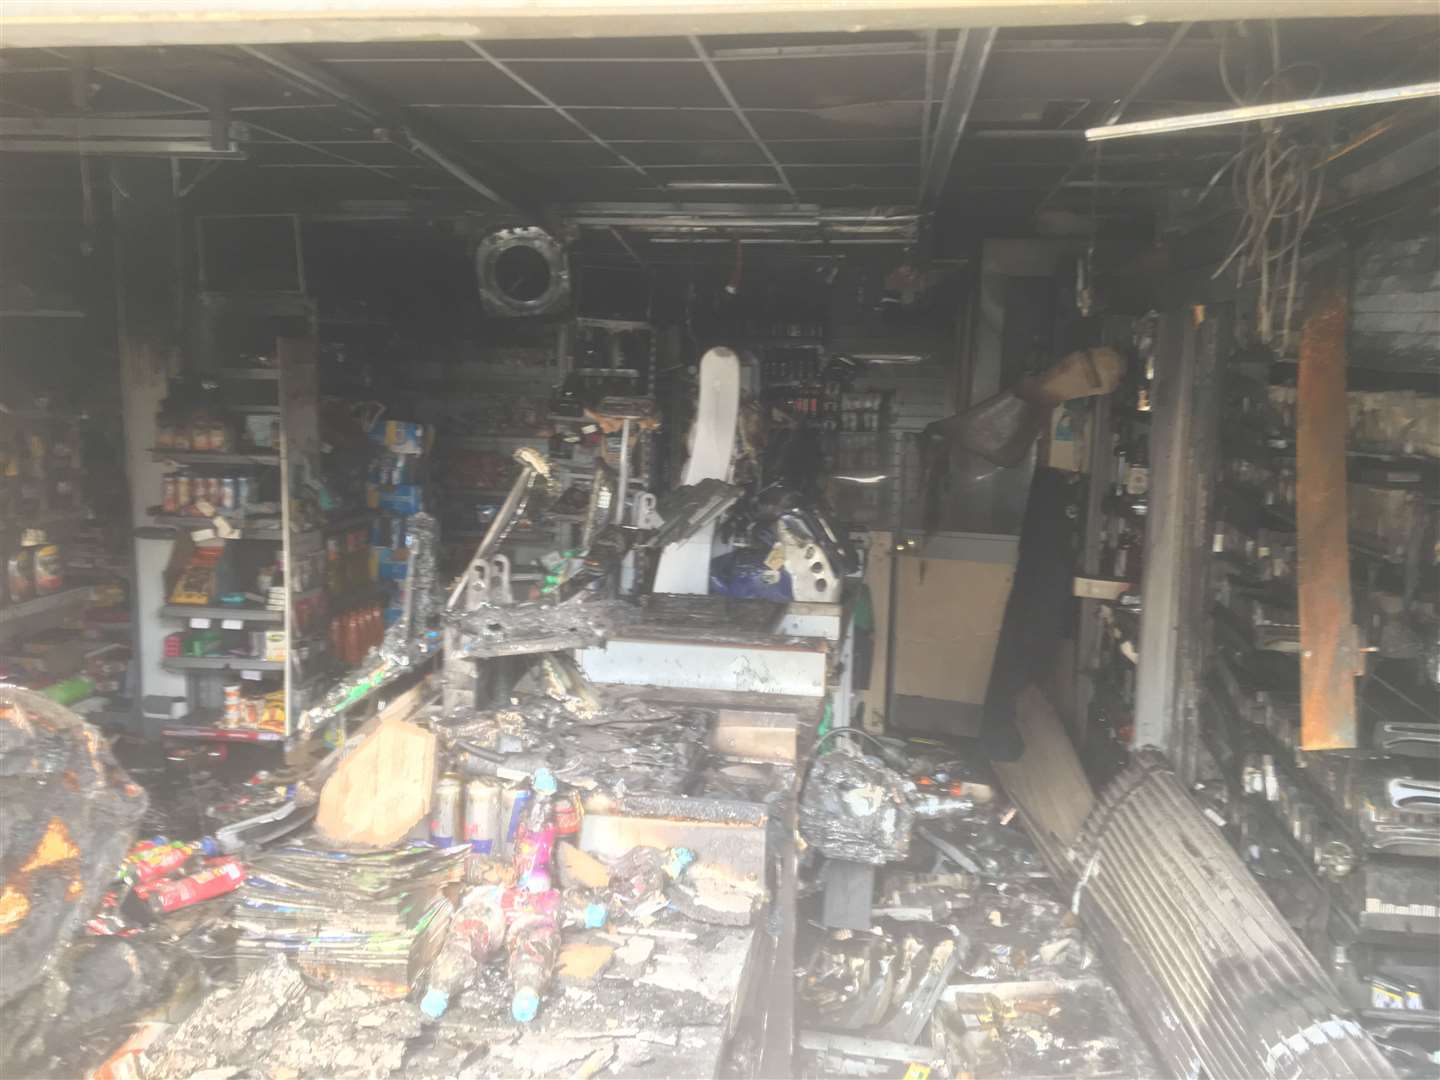 The fire gutted the Co-op store